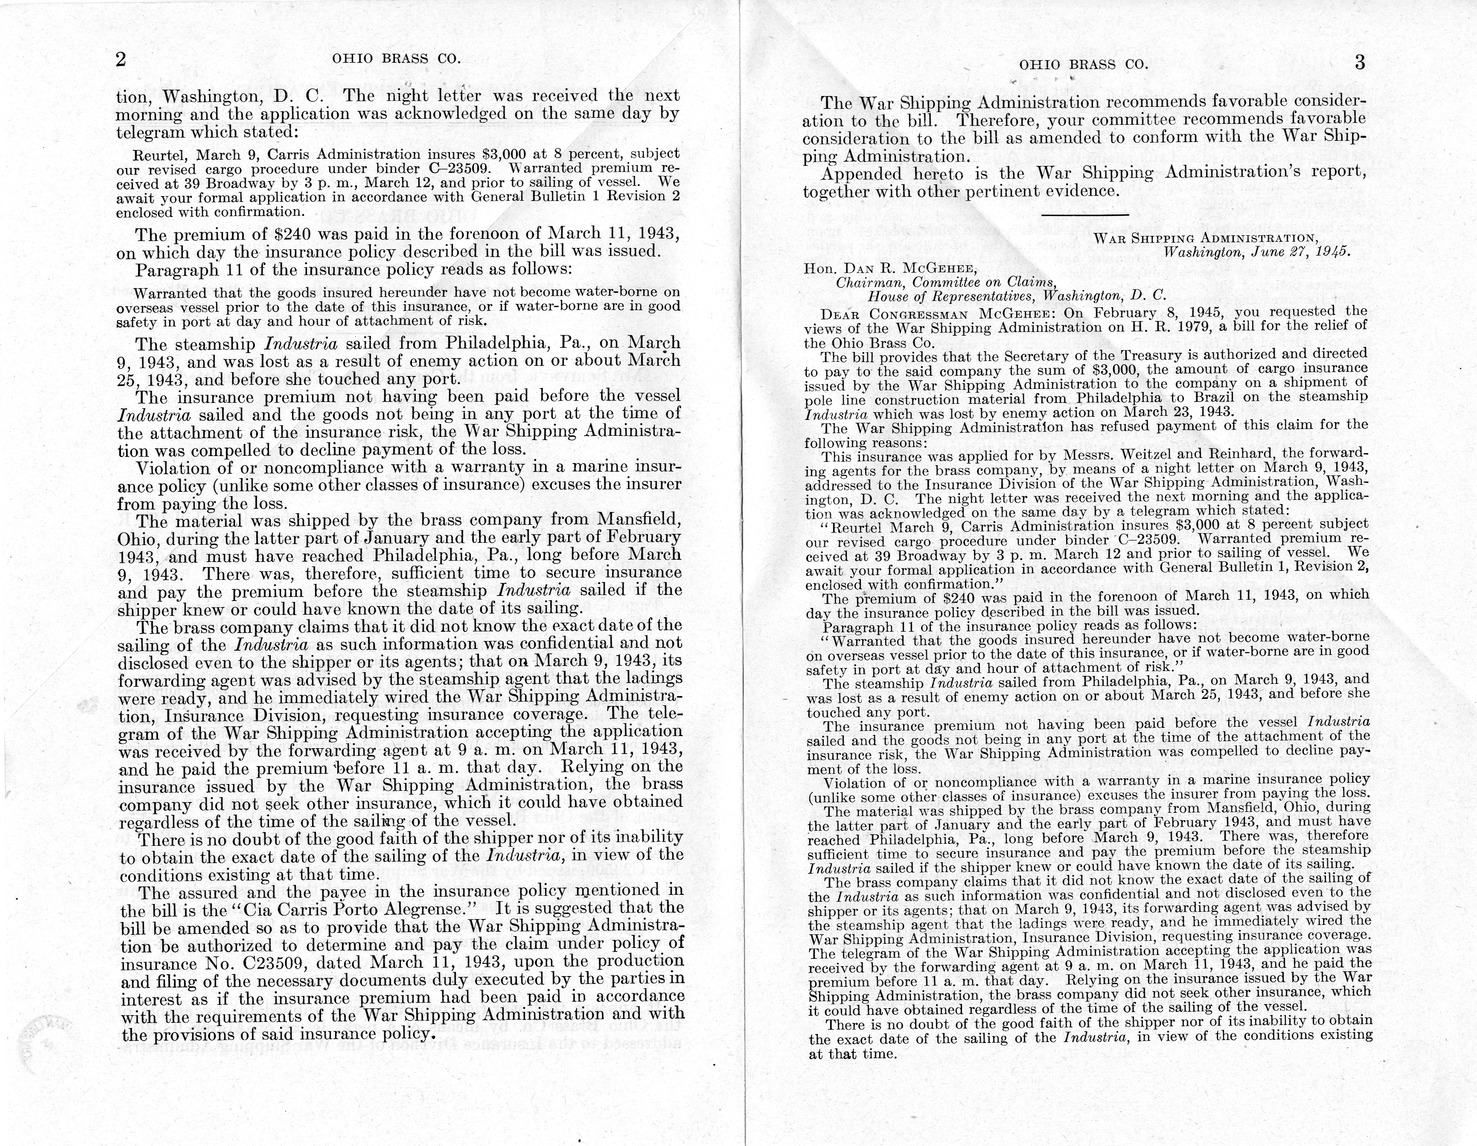 Memorandum from Frederick J. Bailey to M. C. Latta, H.R. 1979, For the Relief of the Ohio Brass Company, with Attachments